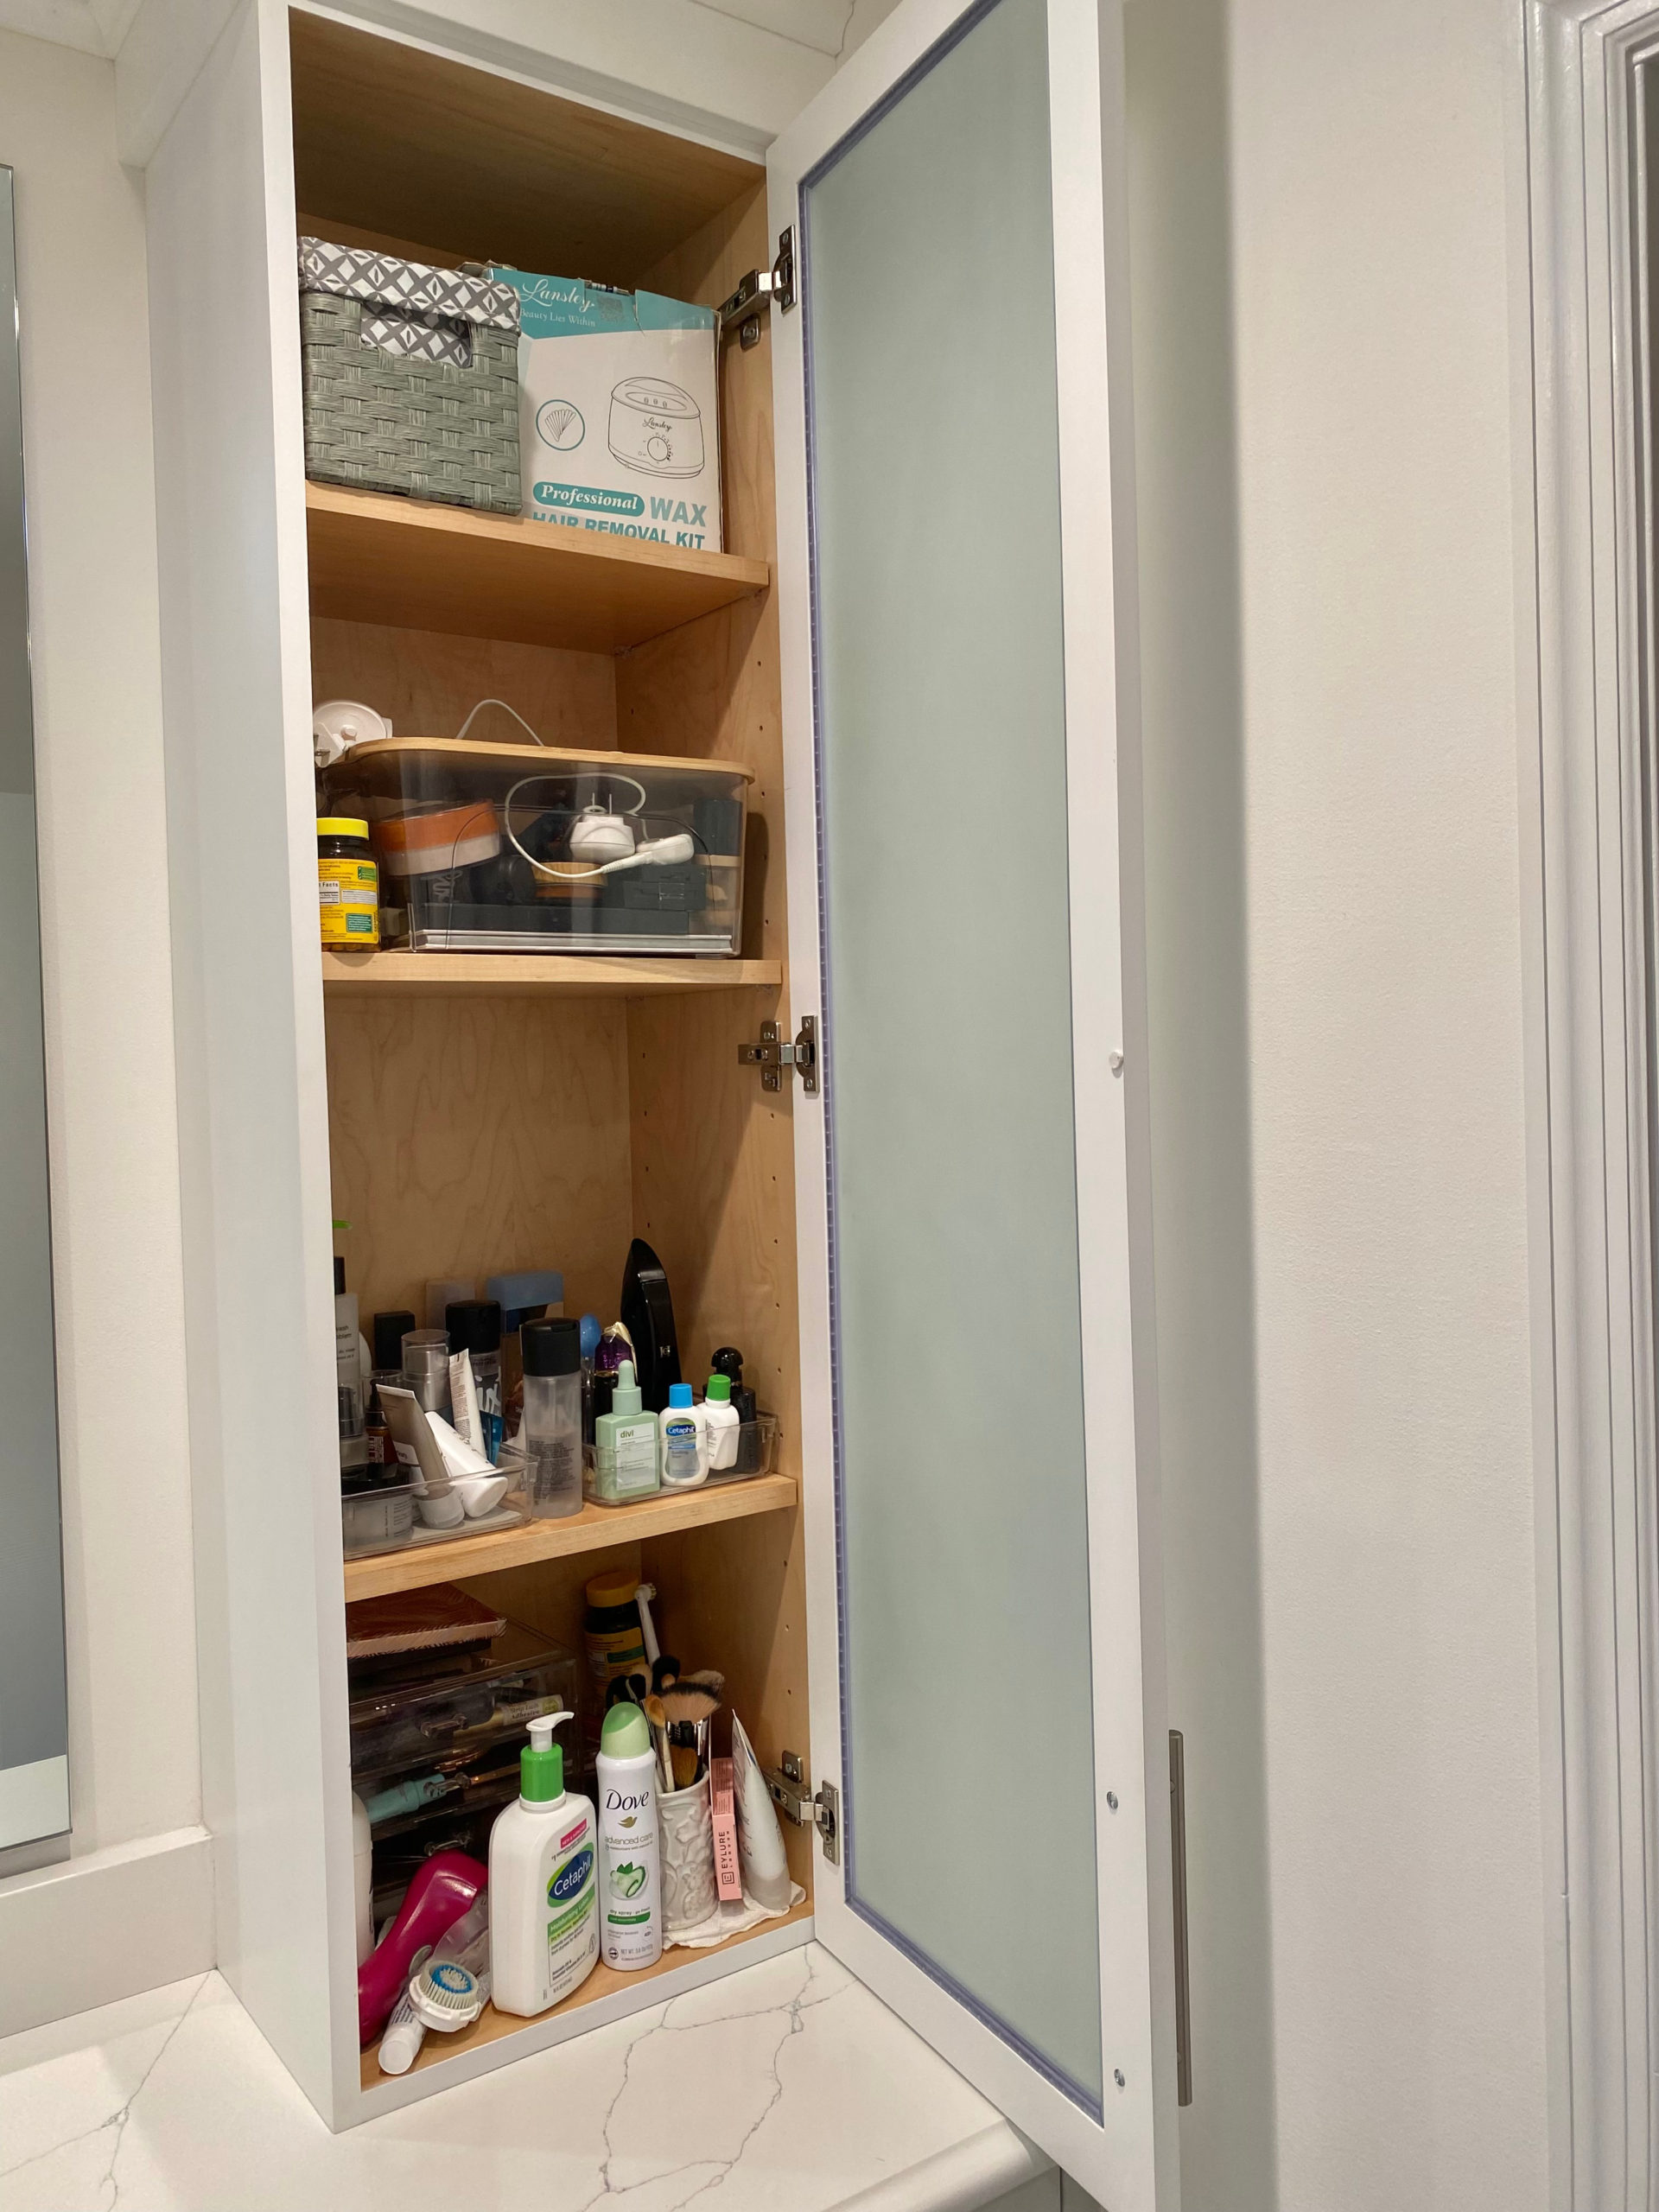 3 insanely easy tips to organize a cabinet